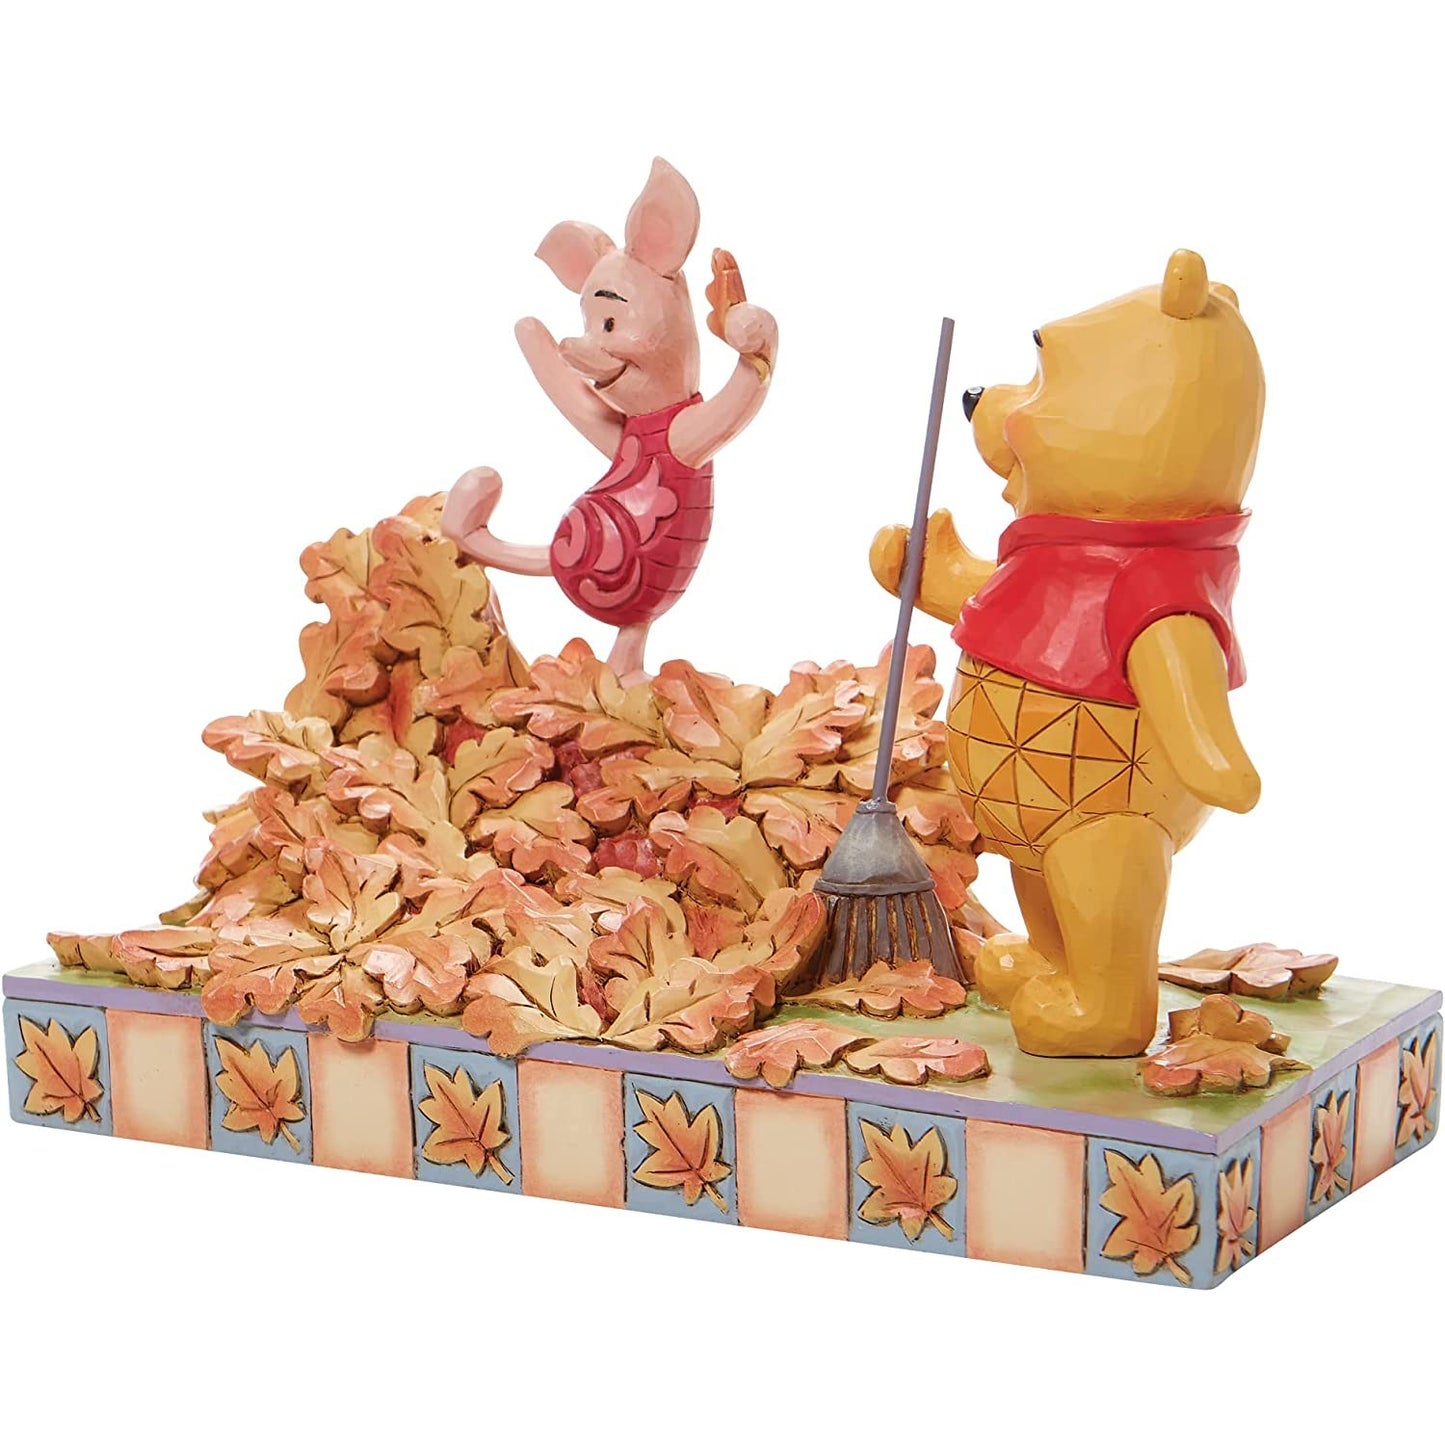 A figurine of Winnie The Pooh and Piglet.